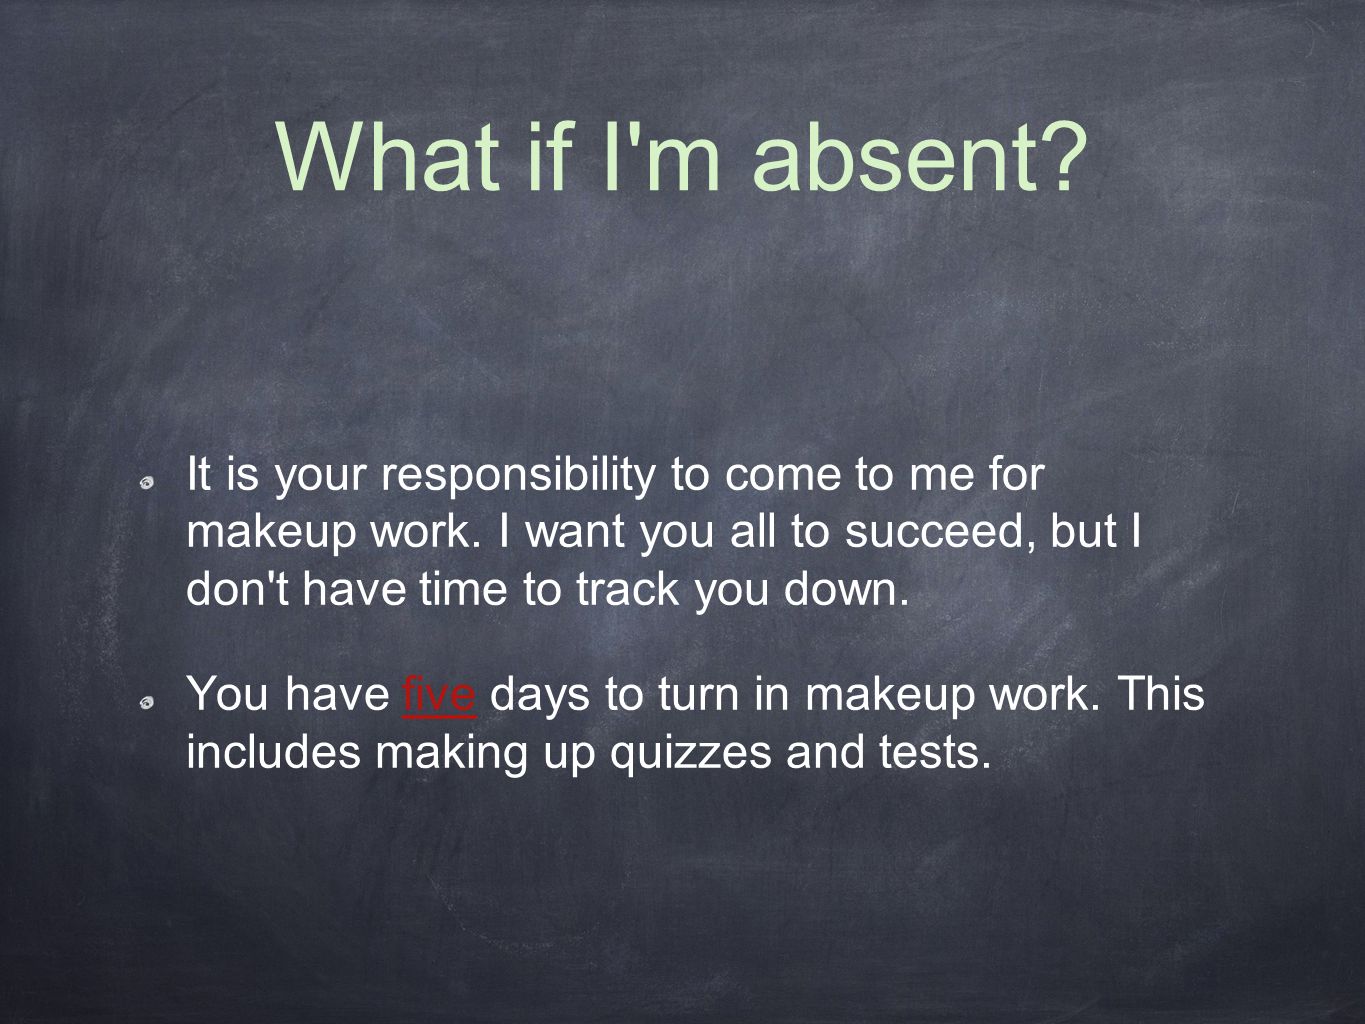 What if I m absent. It is your responsibility to come to me for makeup work.